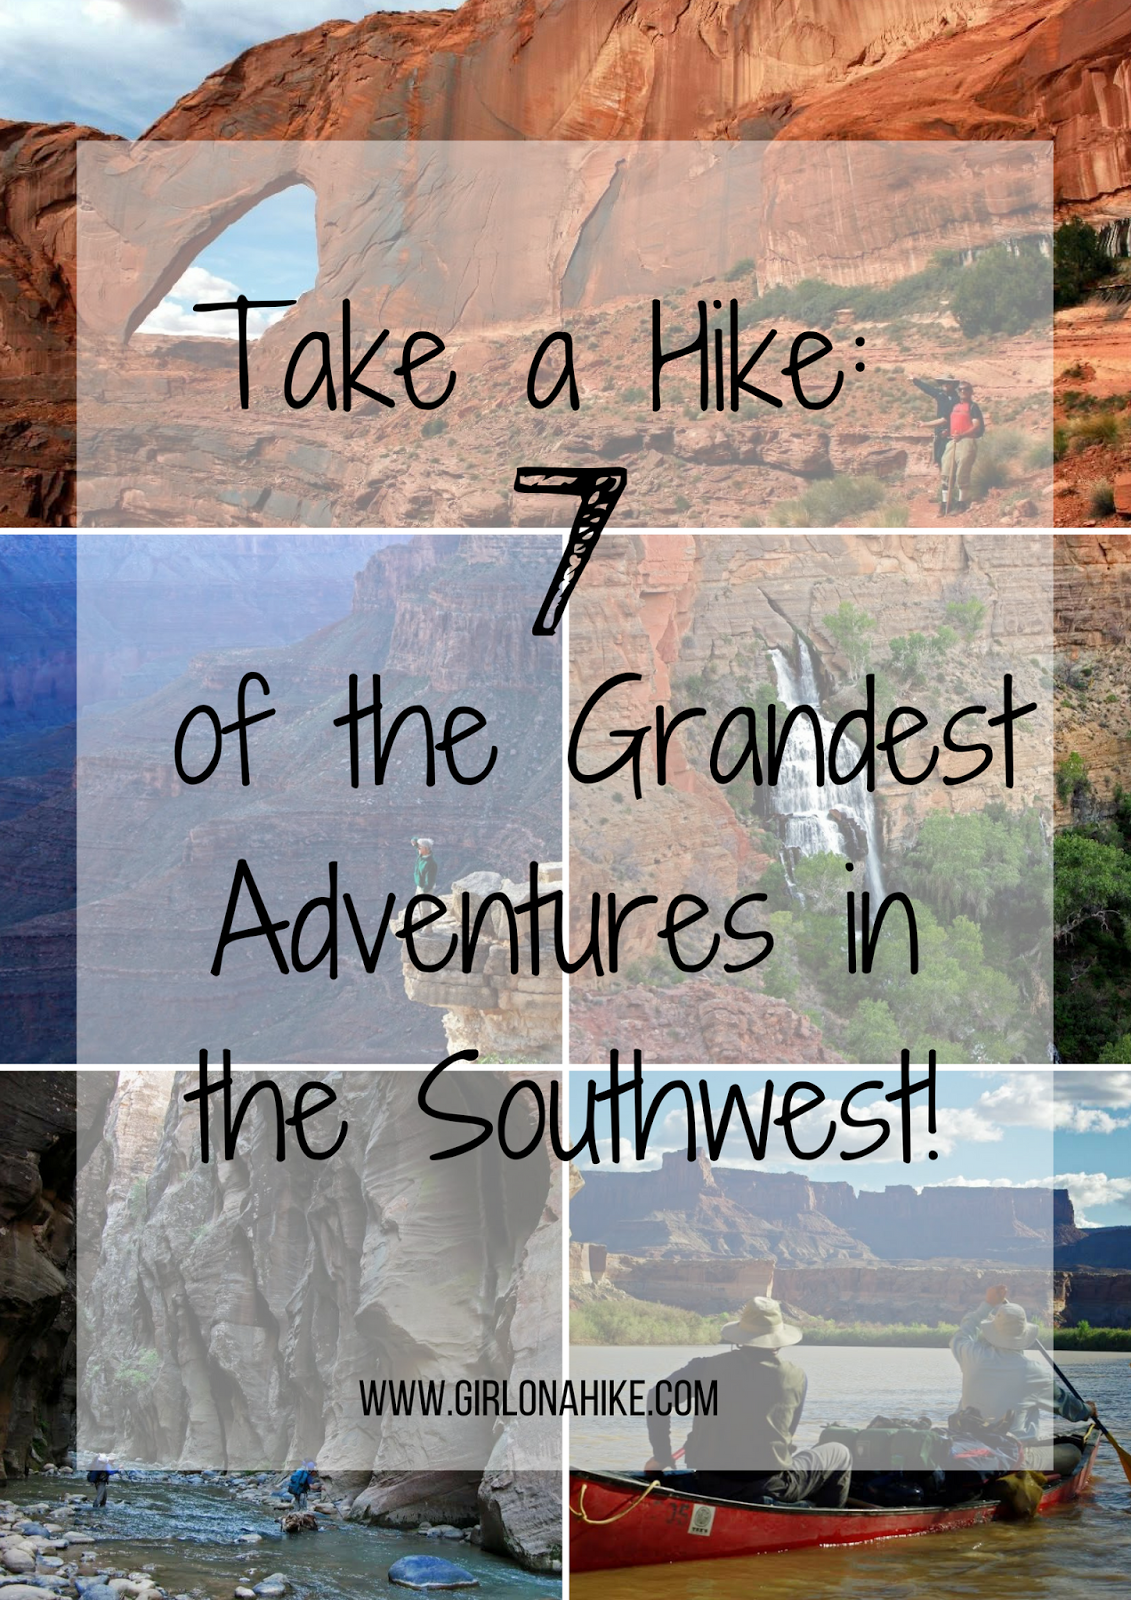 Take a Hike - 7 of the Grandest Adventures in the Southwest